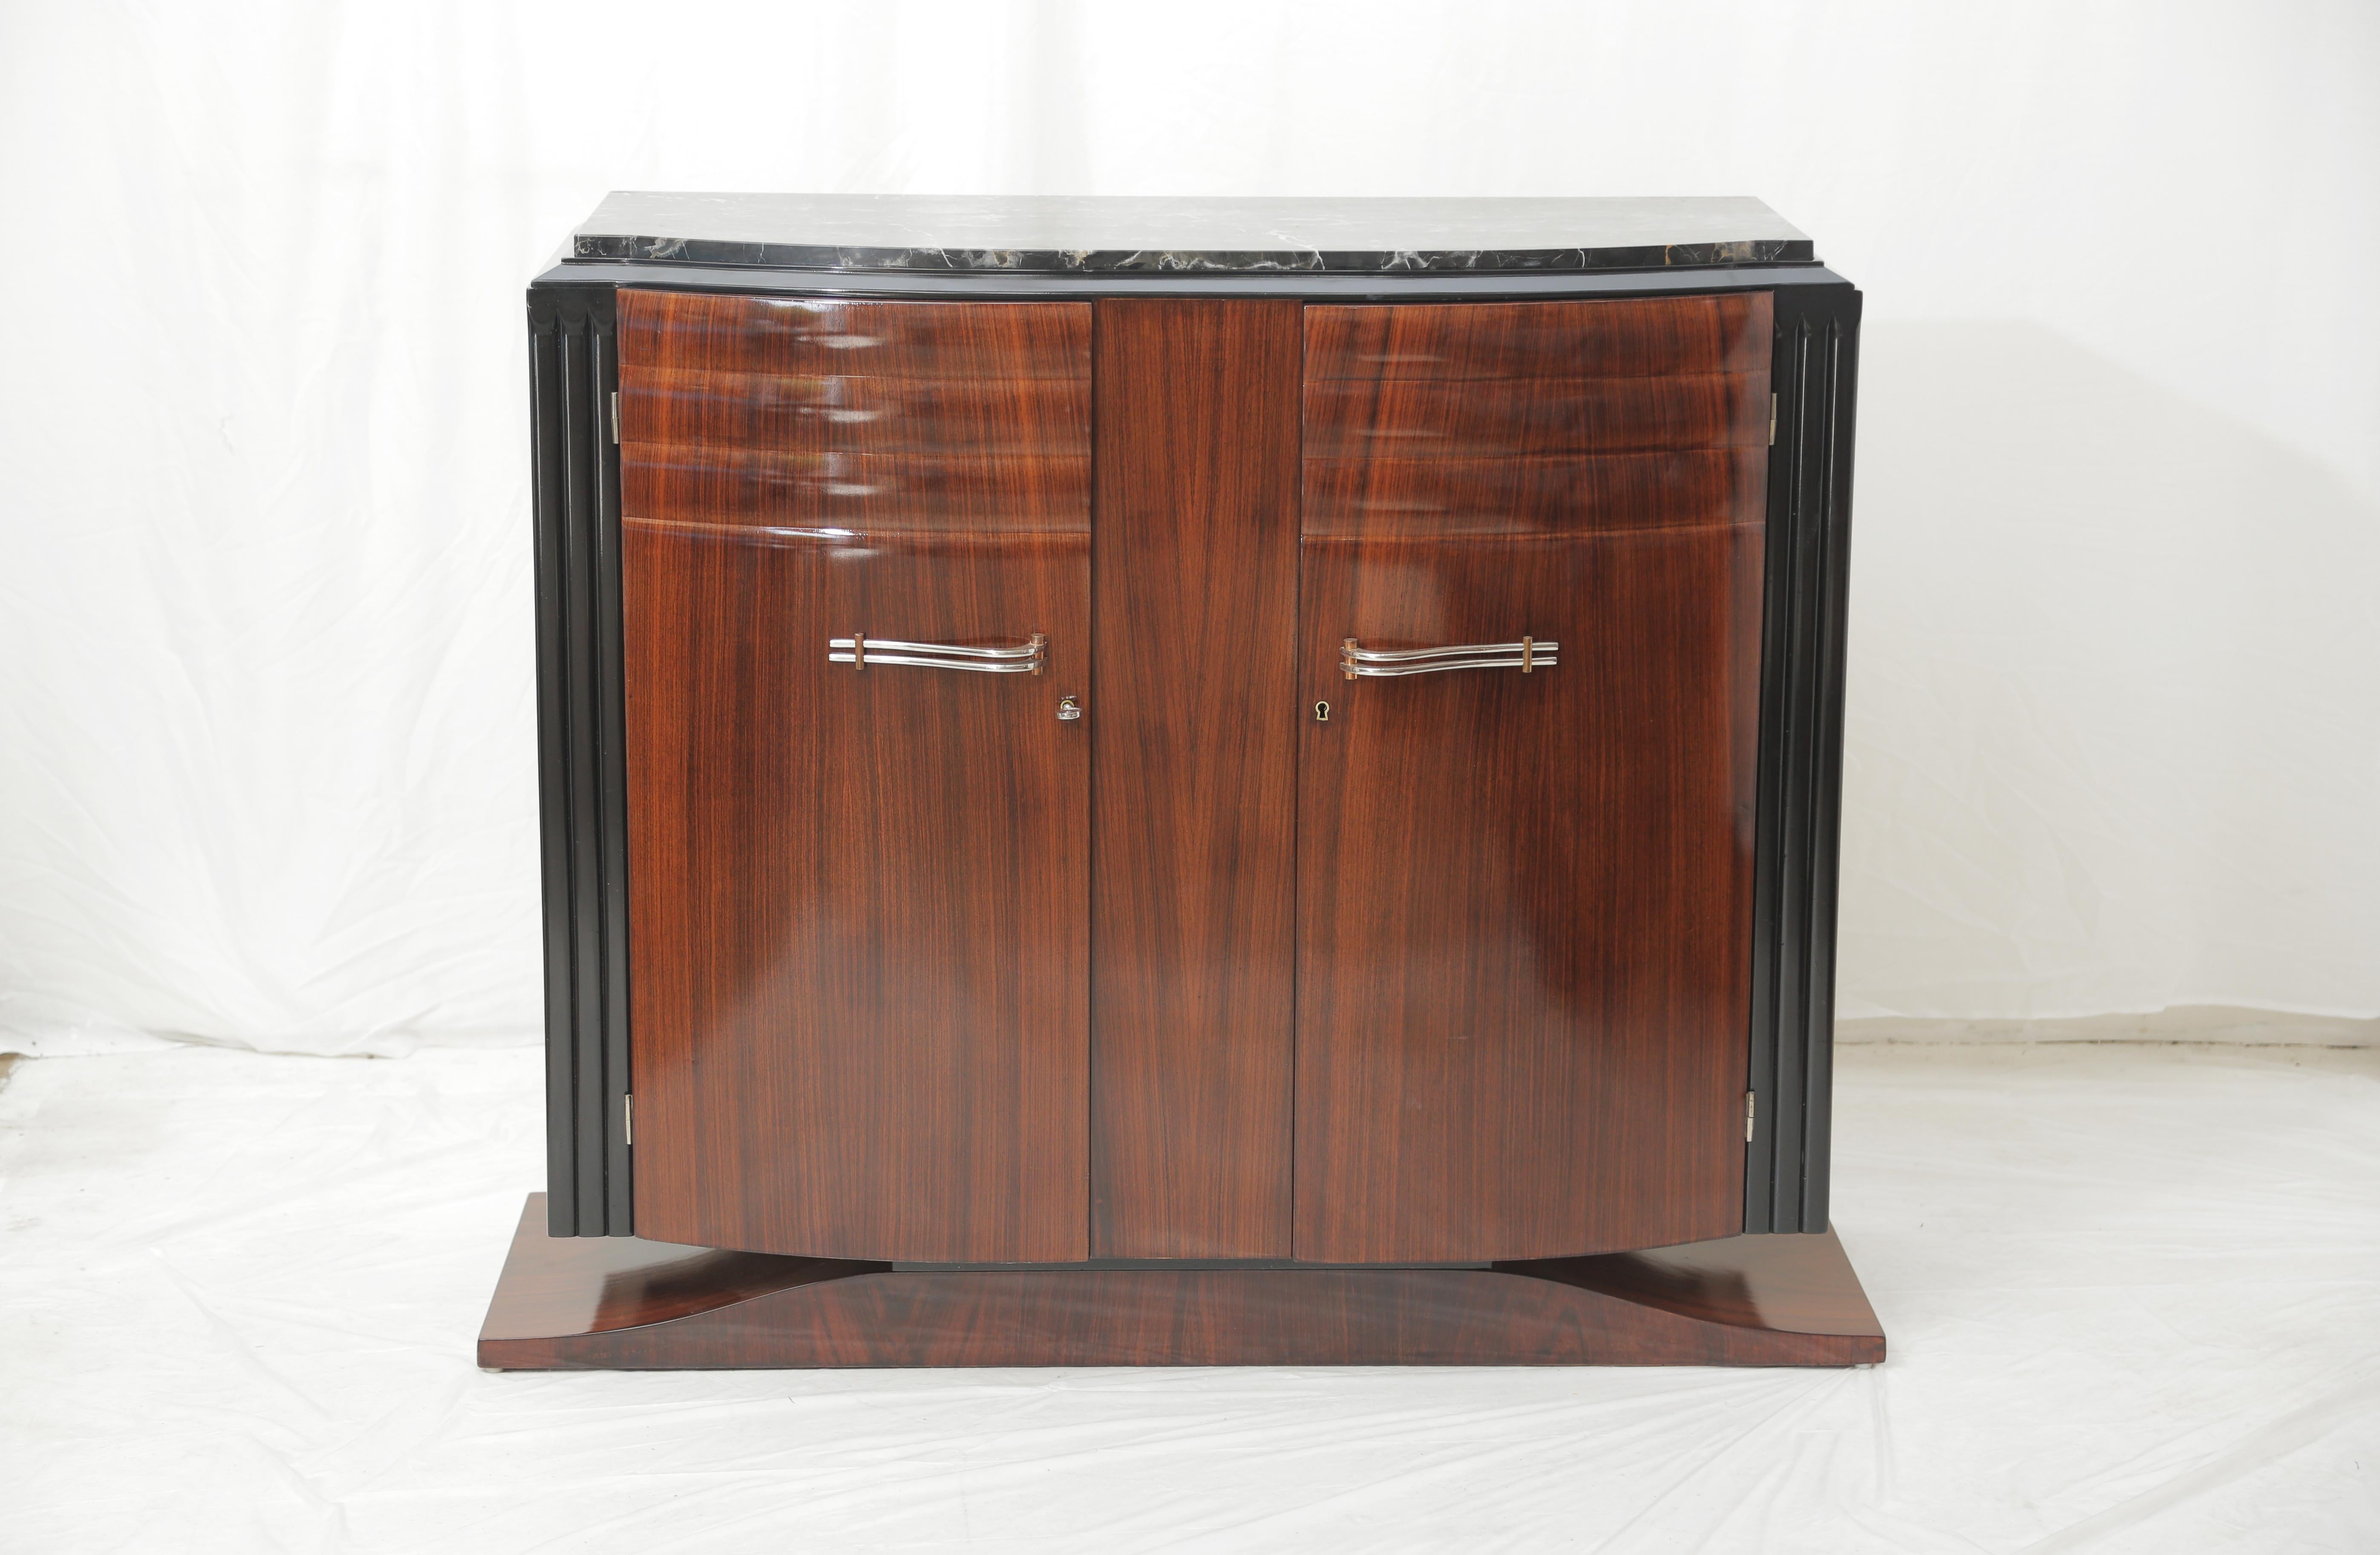 Adorable French late Art Deco (circa 1940) small cabinet in mahogany.
Two curved front doors with two long shelves on the inside, the cabinet stands on an elegant curved shape base and has a very elegant black and gold marble top.
The piece would